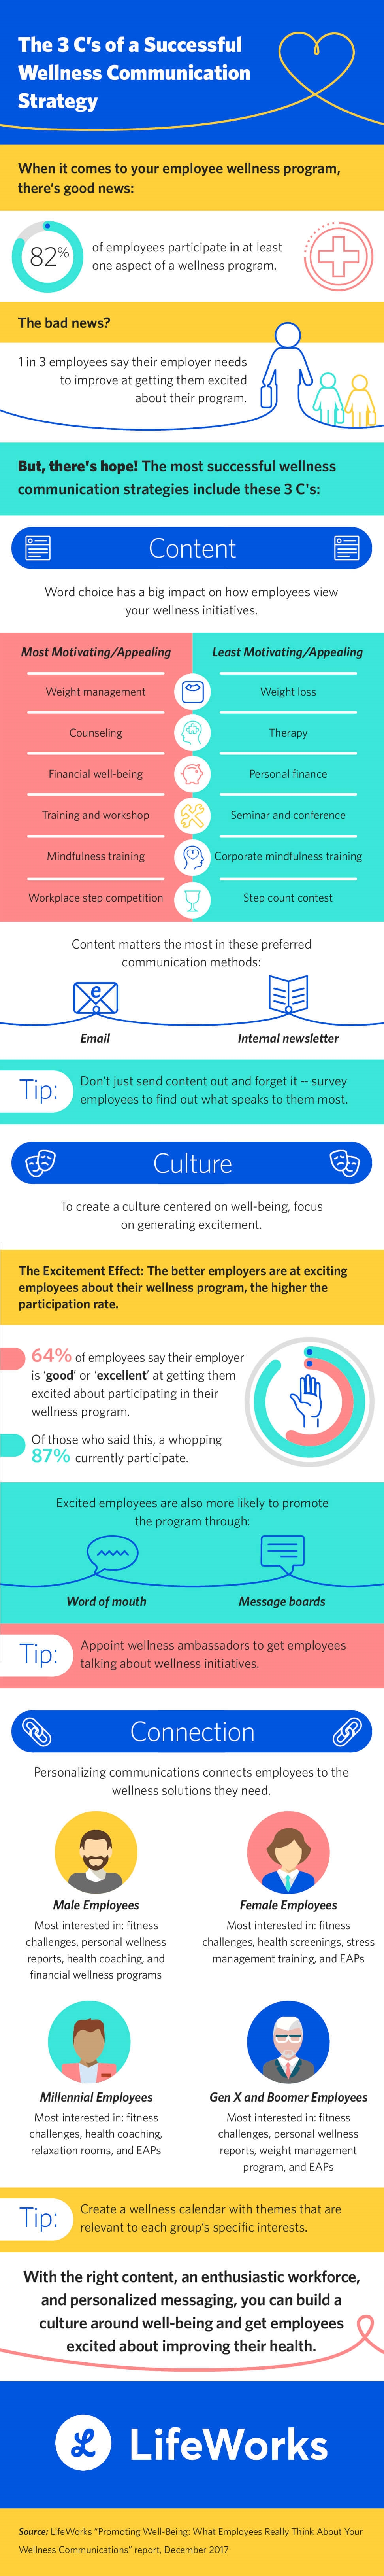 To Build a Wellness-Centric Workplace Culture, Consider Employee Needs [Infographic] | DeviceDaily.com